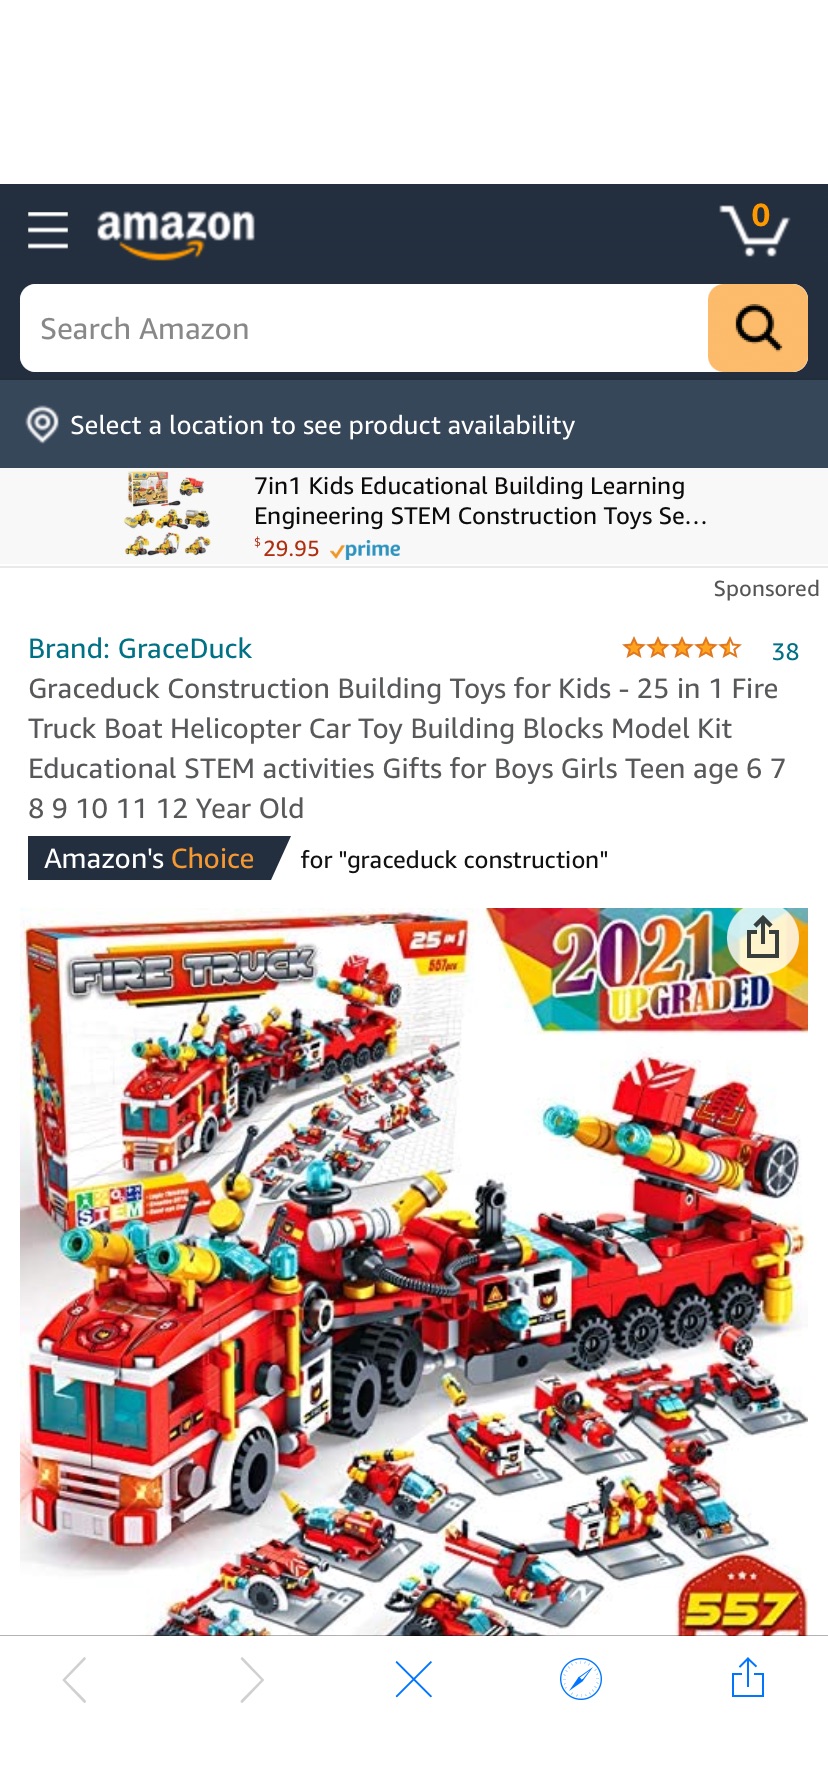 Amazon.com: Graceduck Construction Building Toys for Kids - 25 in 1 Fire Truck Boat Helicopter Car Toy Building Blocks Model Kit Educational STEM activities Gifts for Boys Girls火车拼接玩具